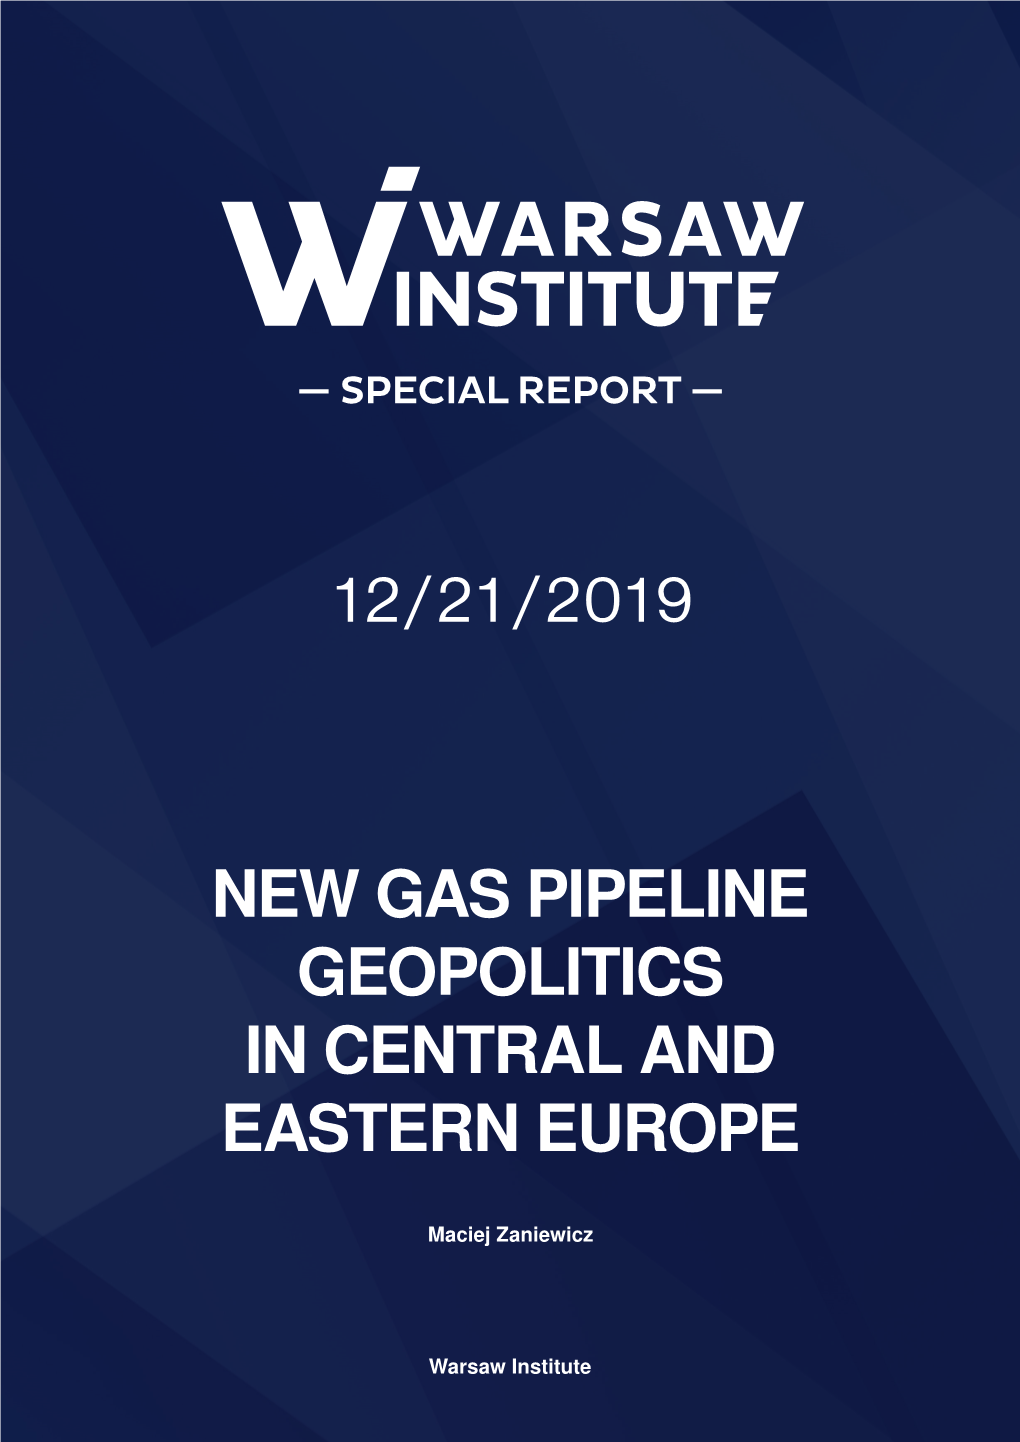 New Gas Pipeline Geopolitics in Central and Eastern Europe